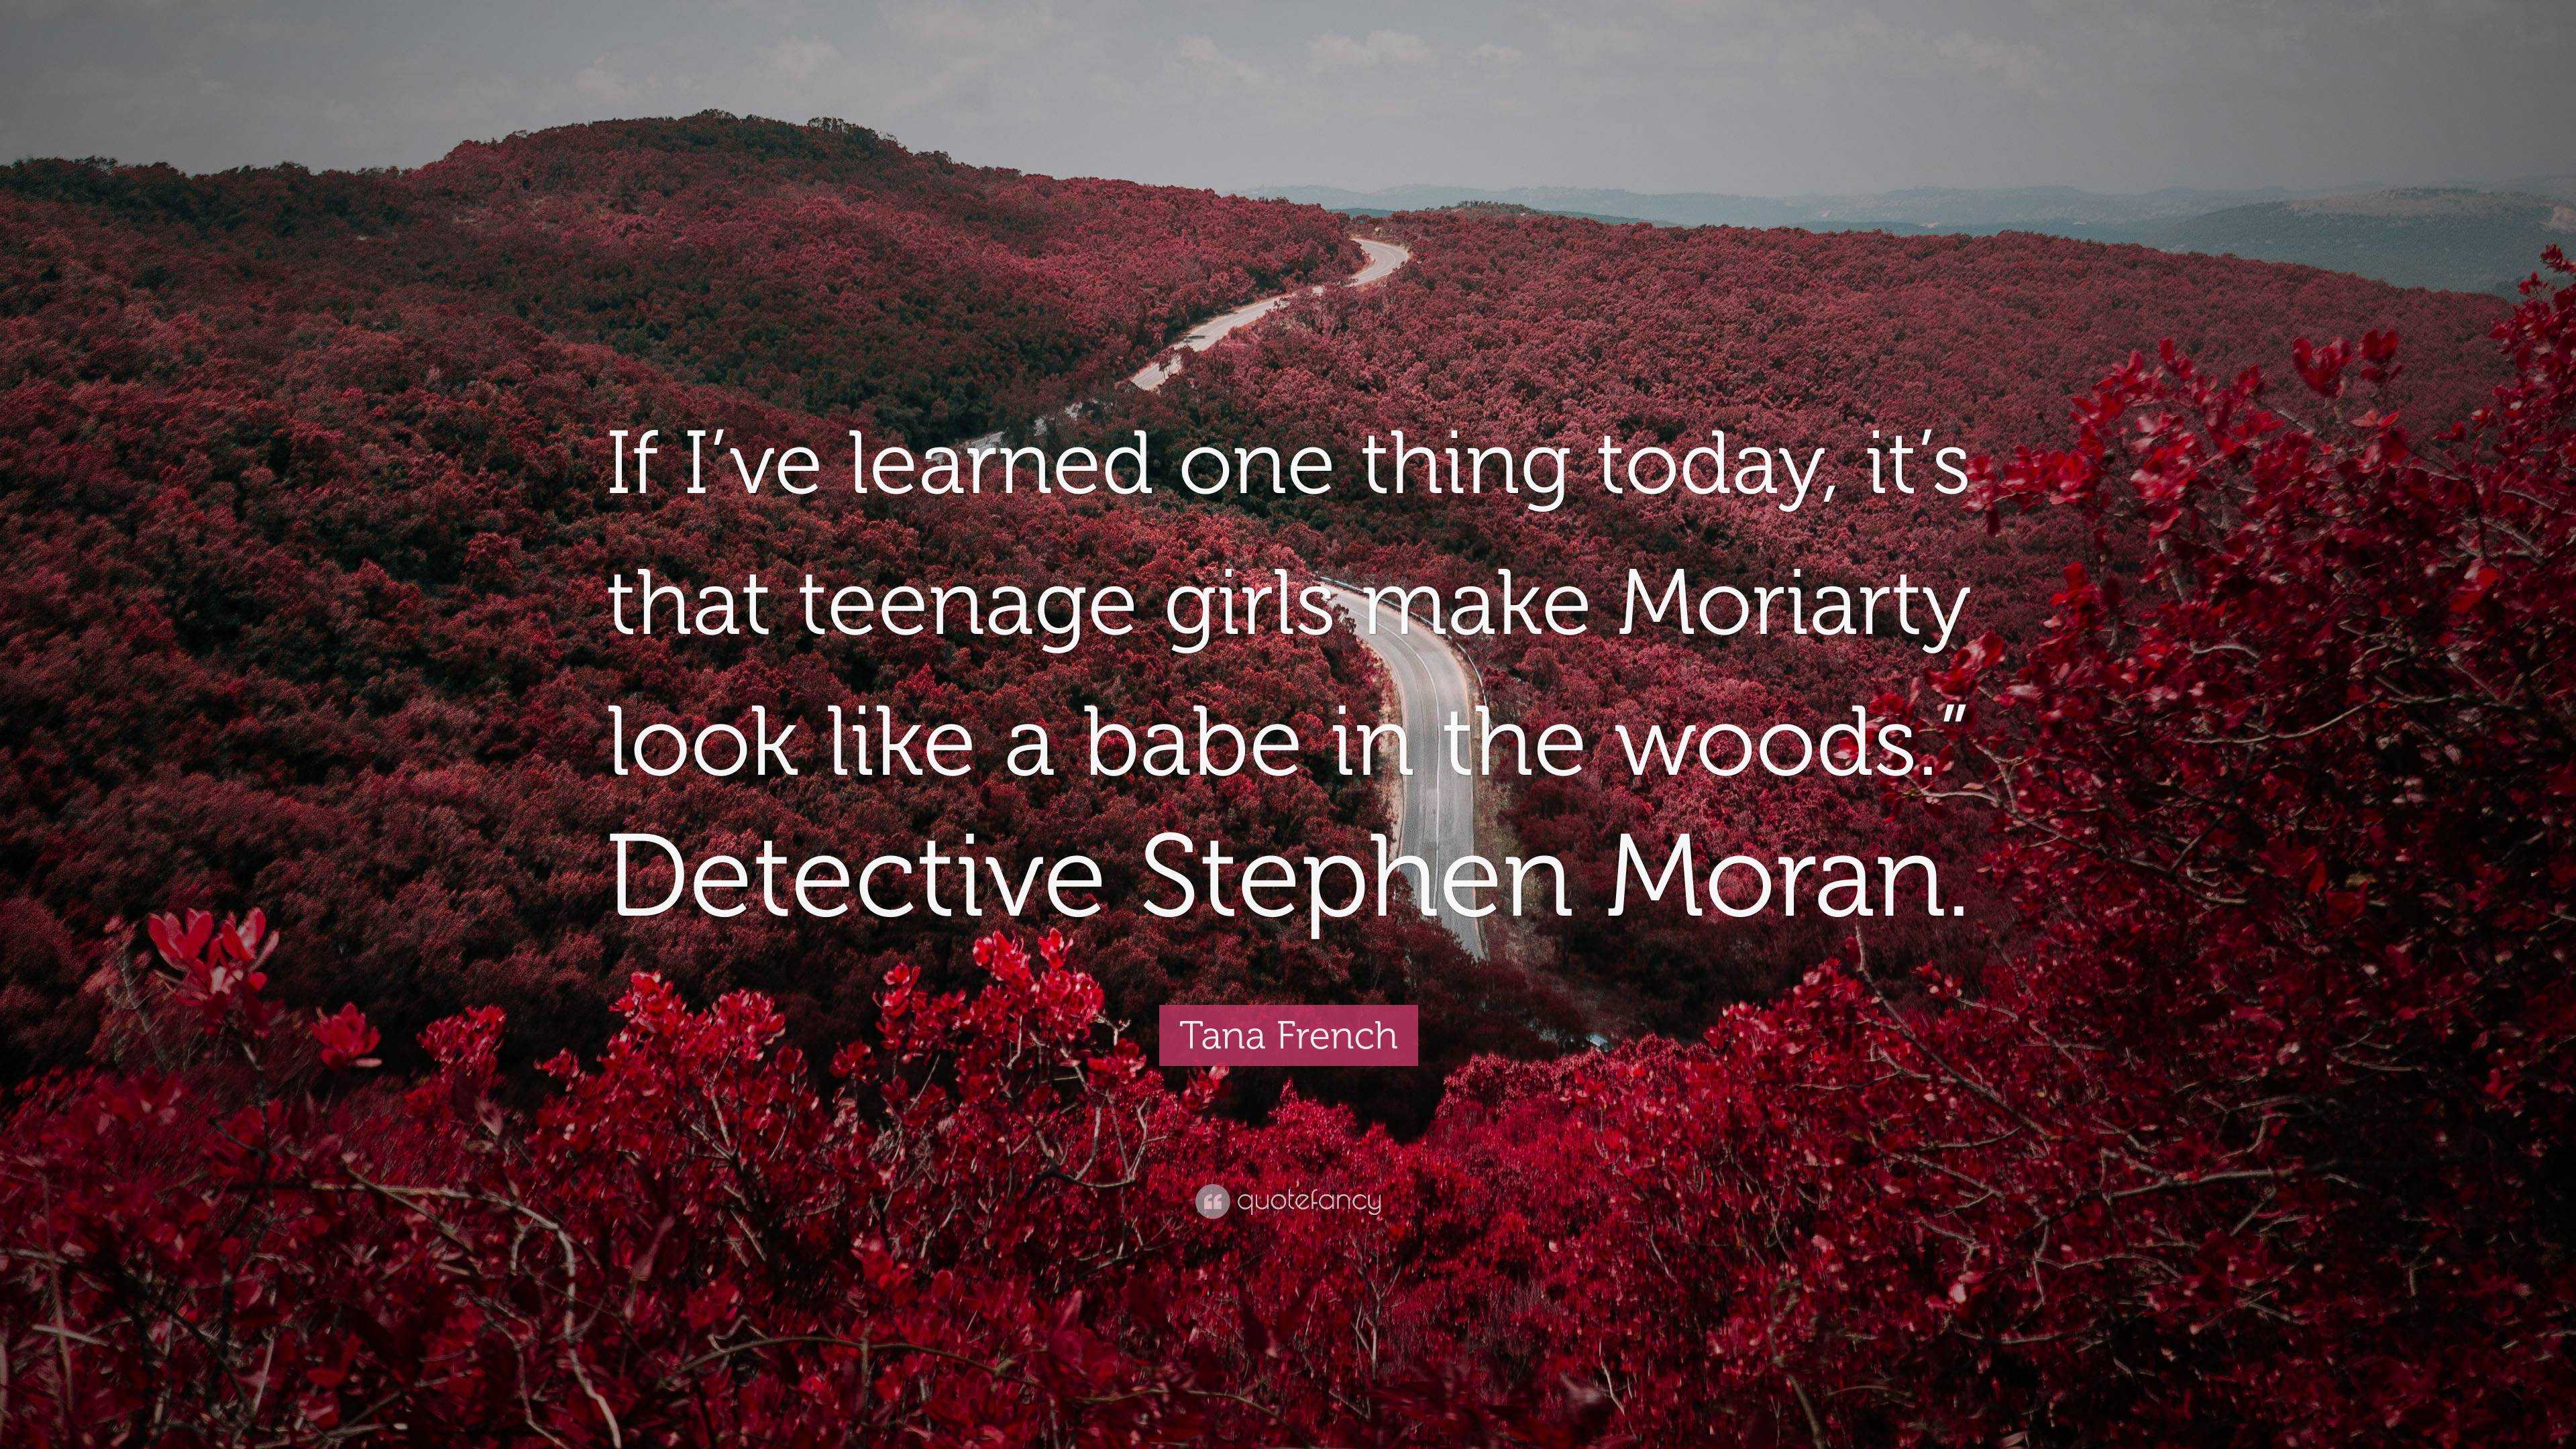 Tana French Quote If I Ve Learned One Thing Today It S That Teenage Girls Make Moriarty Look Like A Babe In The Woods Detective Stephen